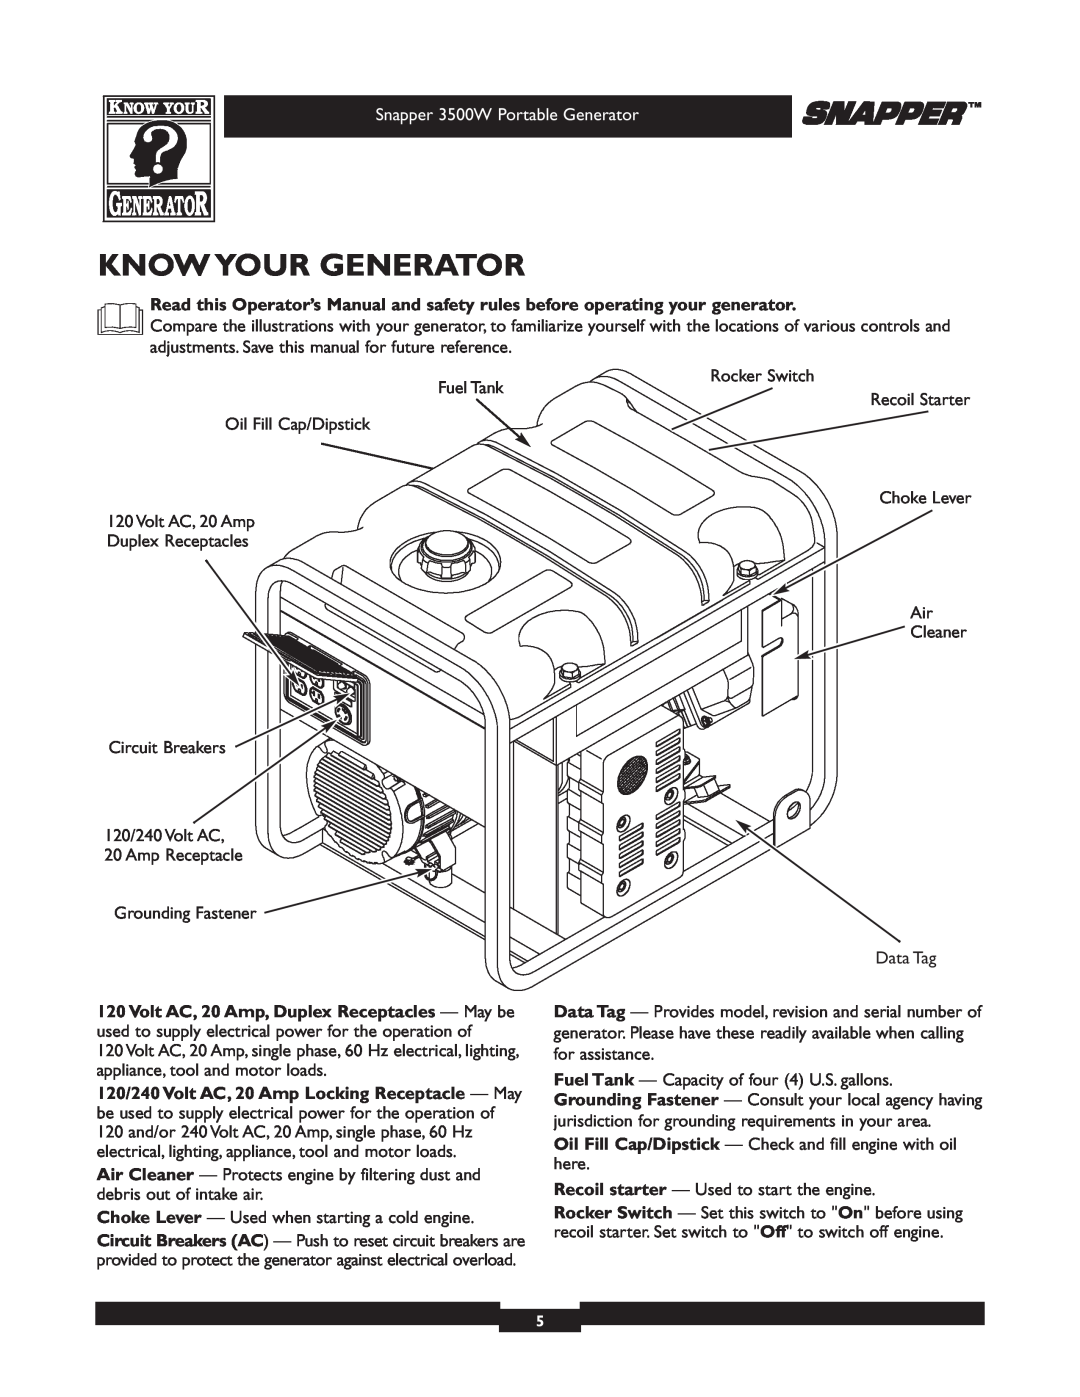 Snapper manual Know Your Generator, Snapper 3500W Portable Generator 